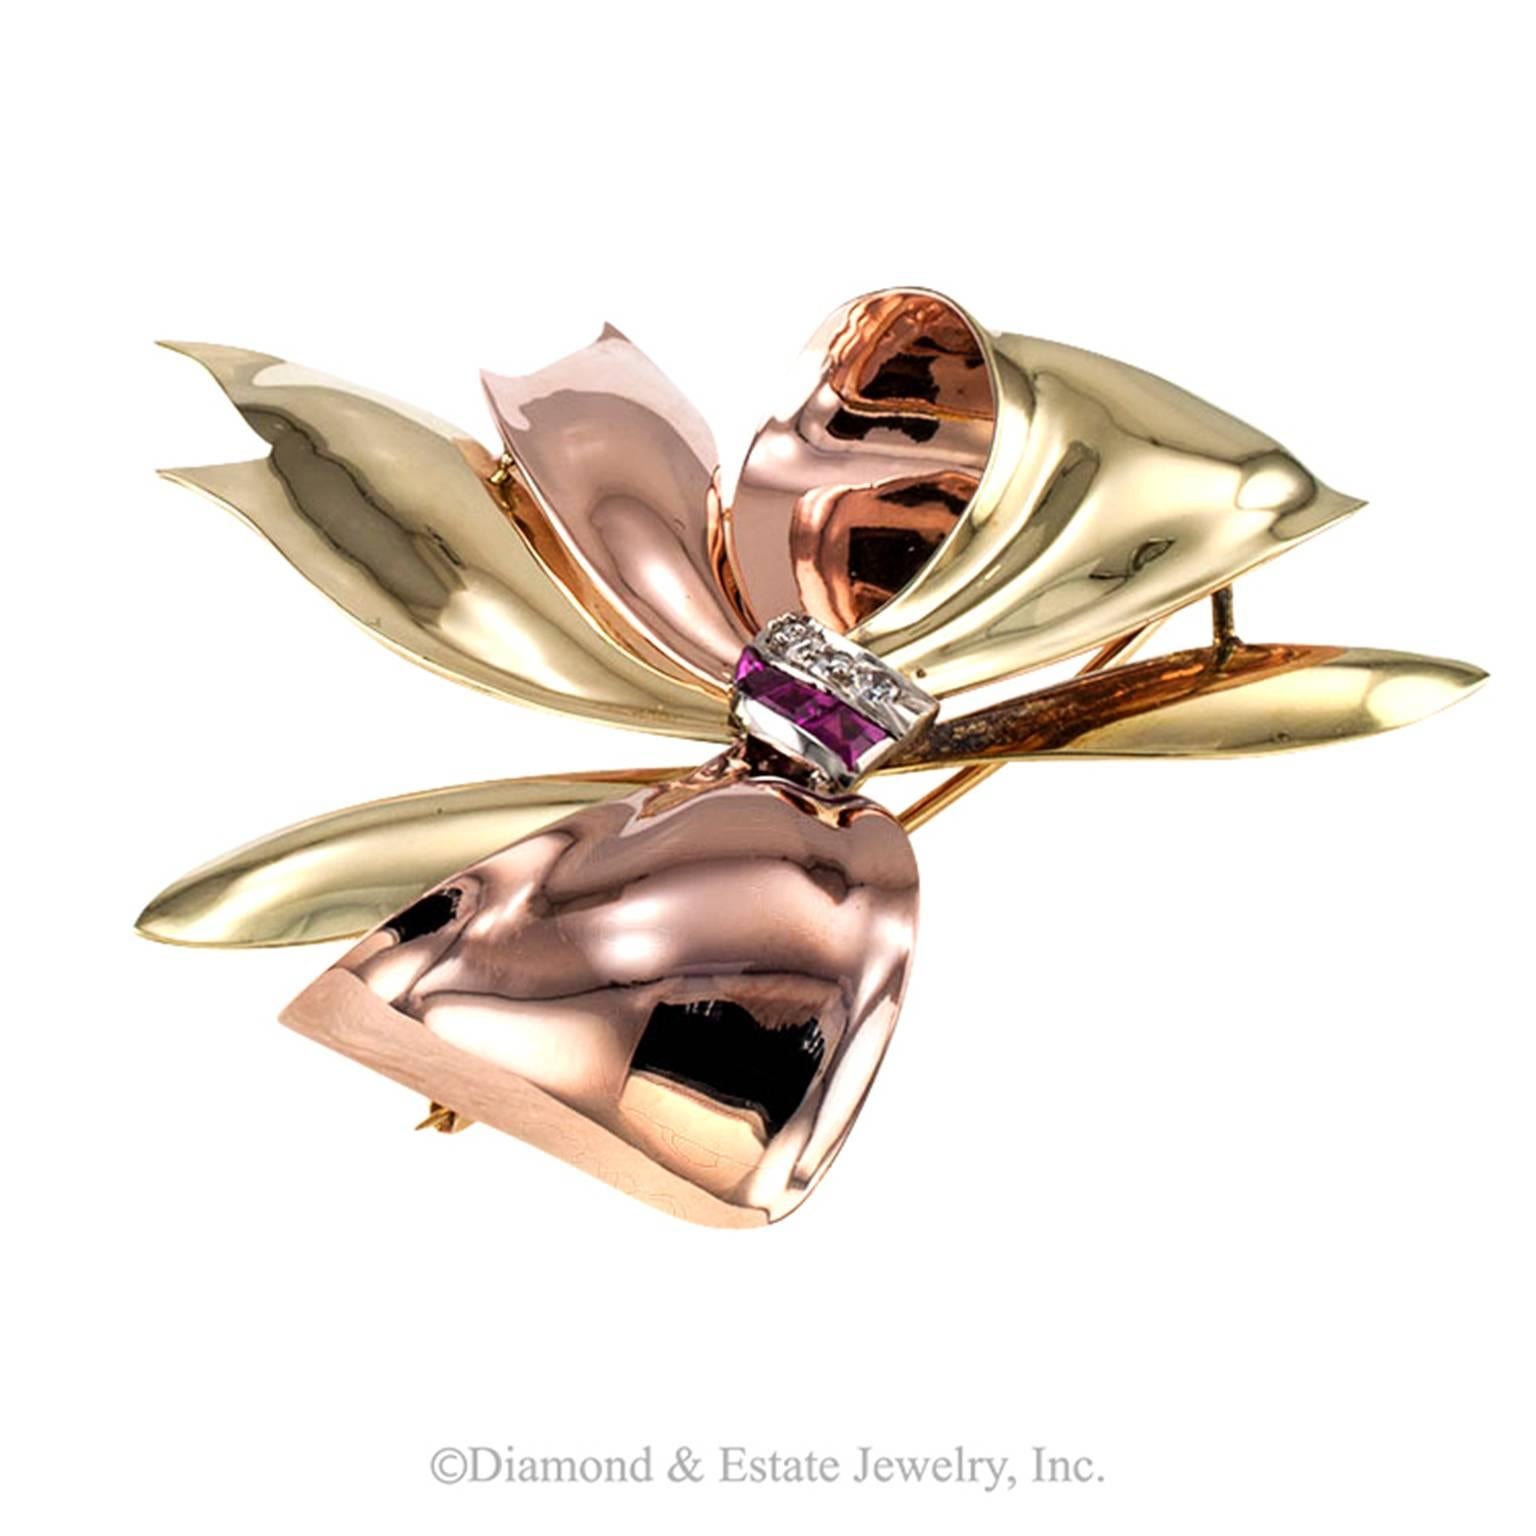 Tiffany and Company Estate Ruby and Diamond Retro Bow Brooch

Handcrafted in three very distinctive shades of 14 karat gold accented with calibrated rubies and four diamonds totaling approximately 0.12 carat.  The use of various colored metals is